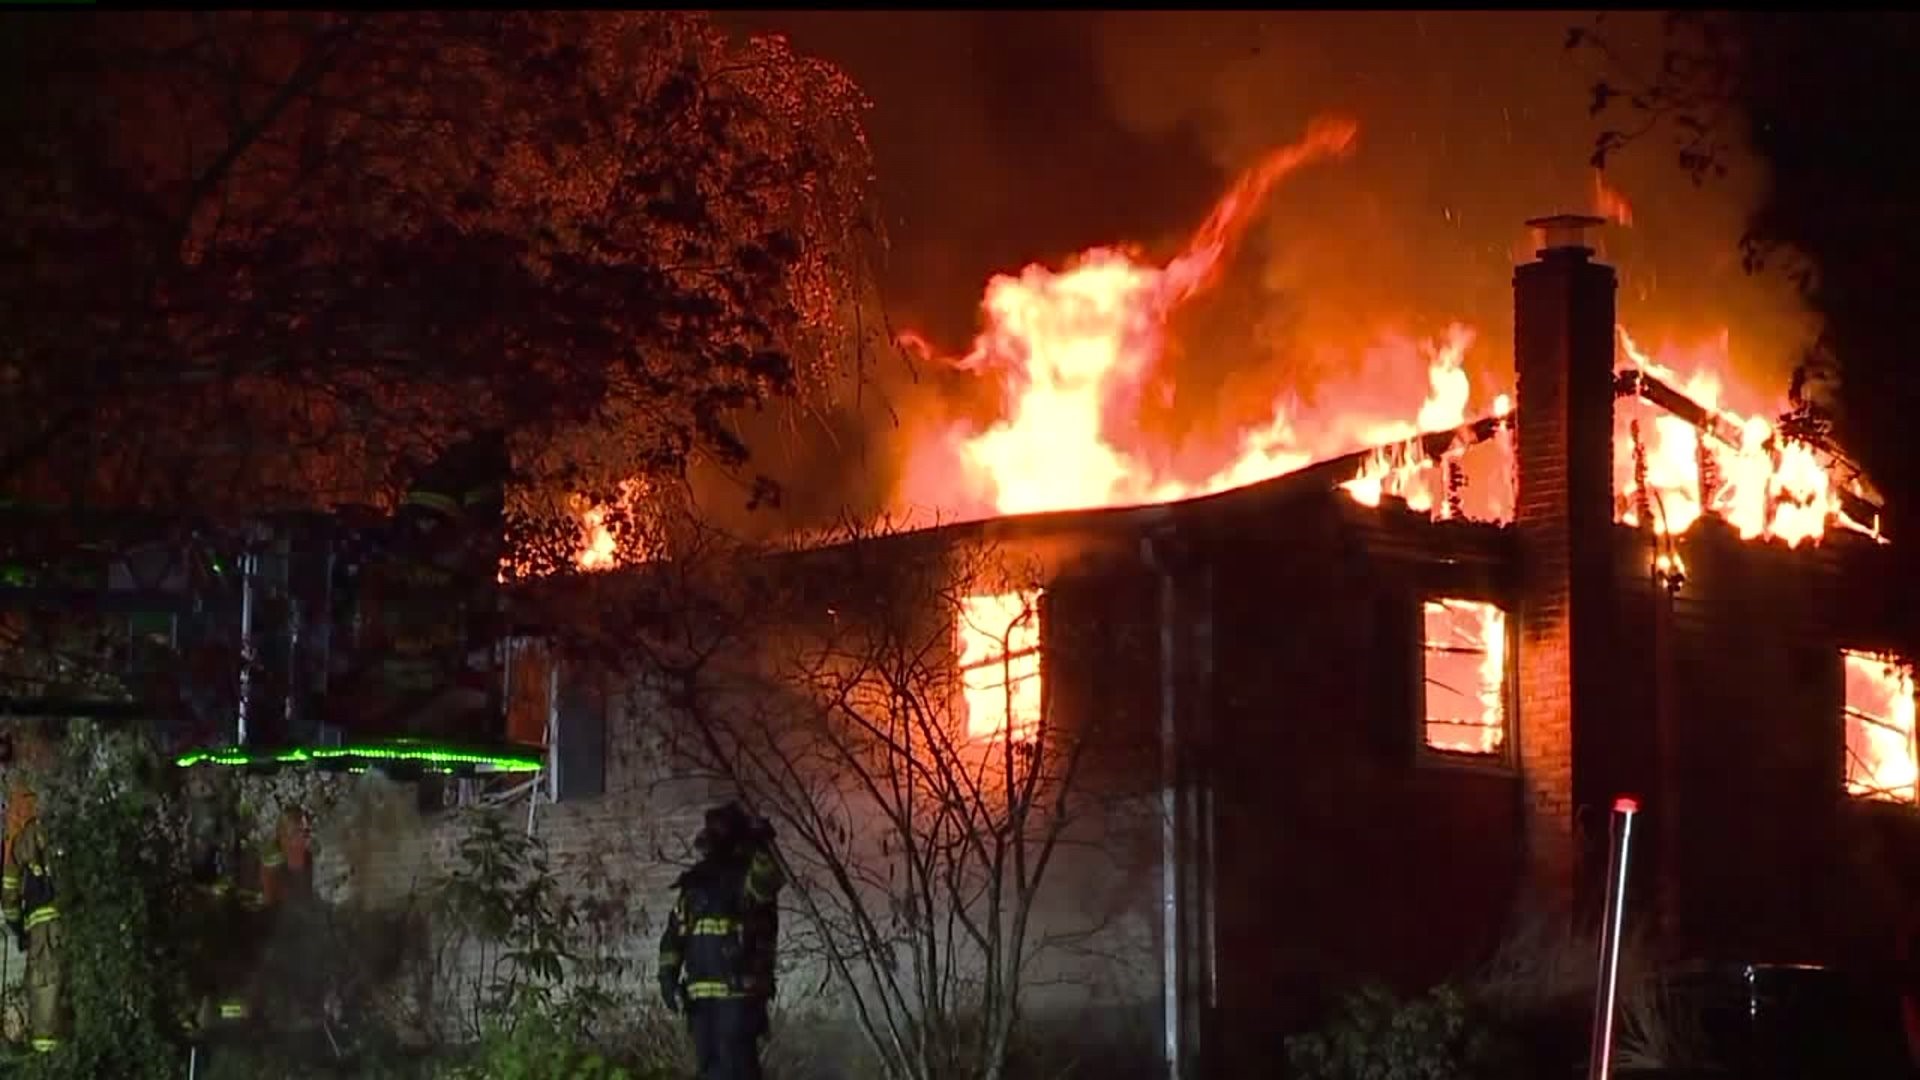 No injuries suffered after three-alarm fire in Newberry Township